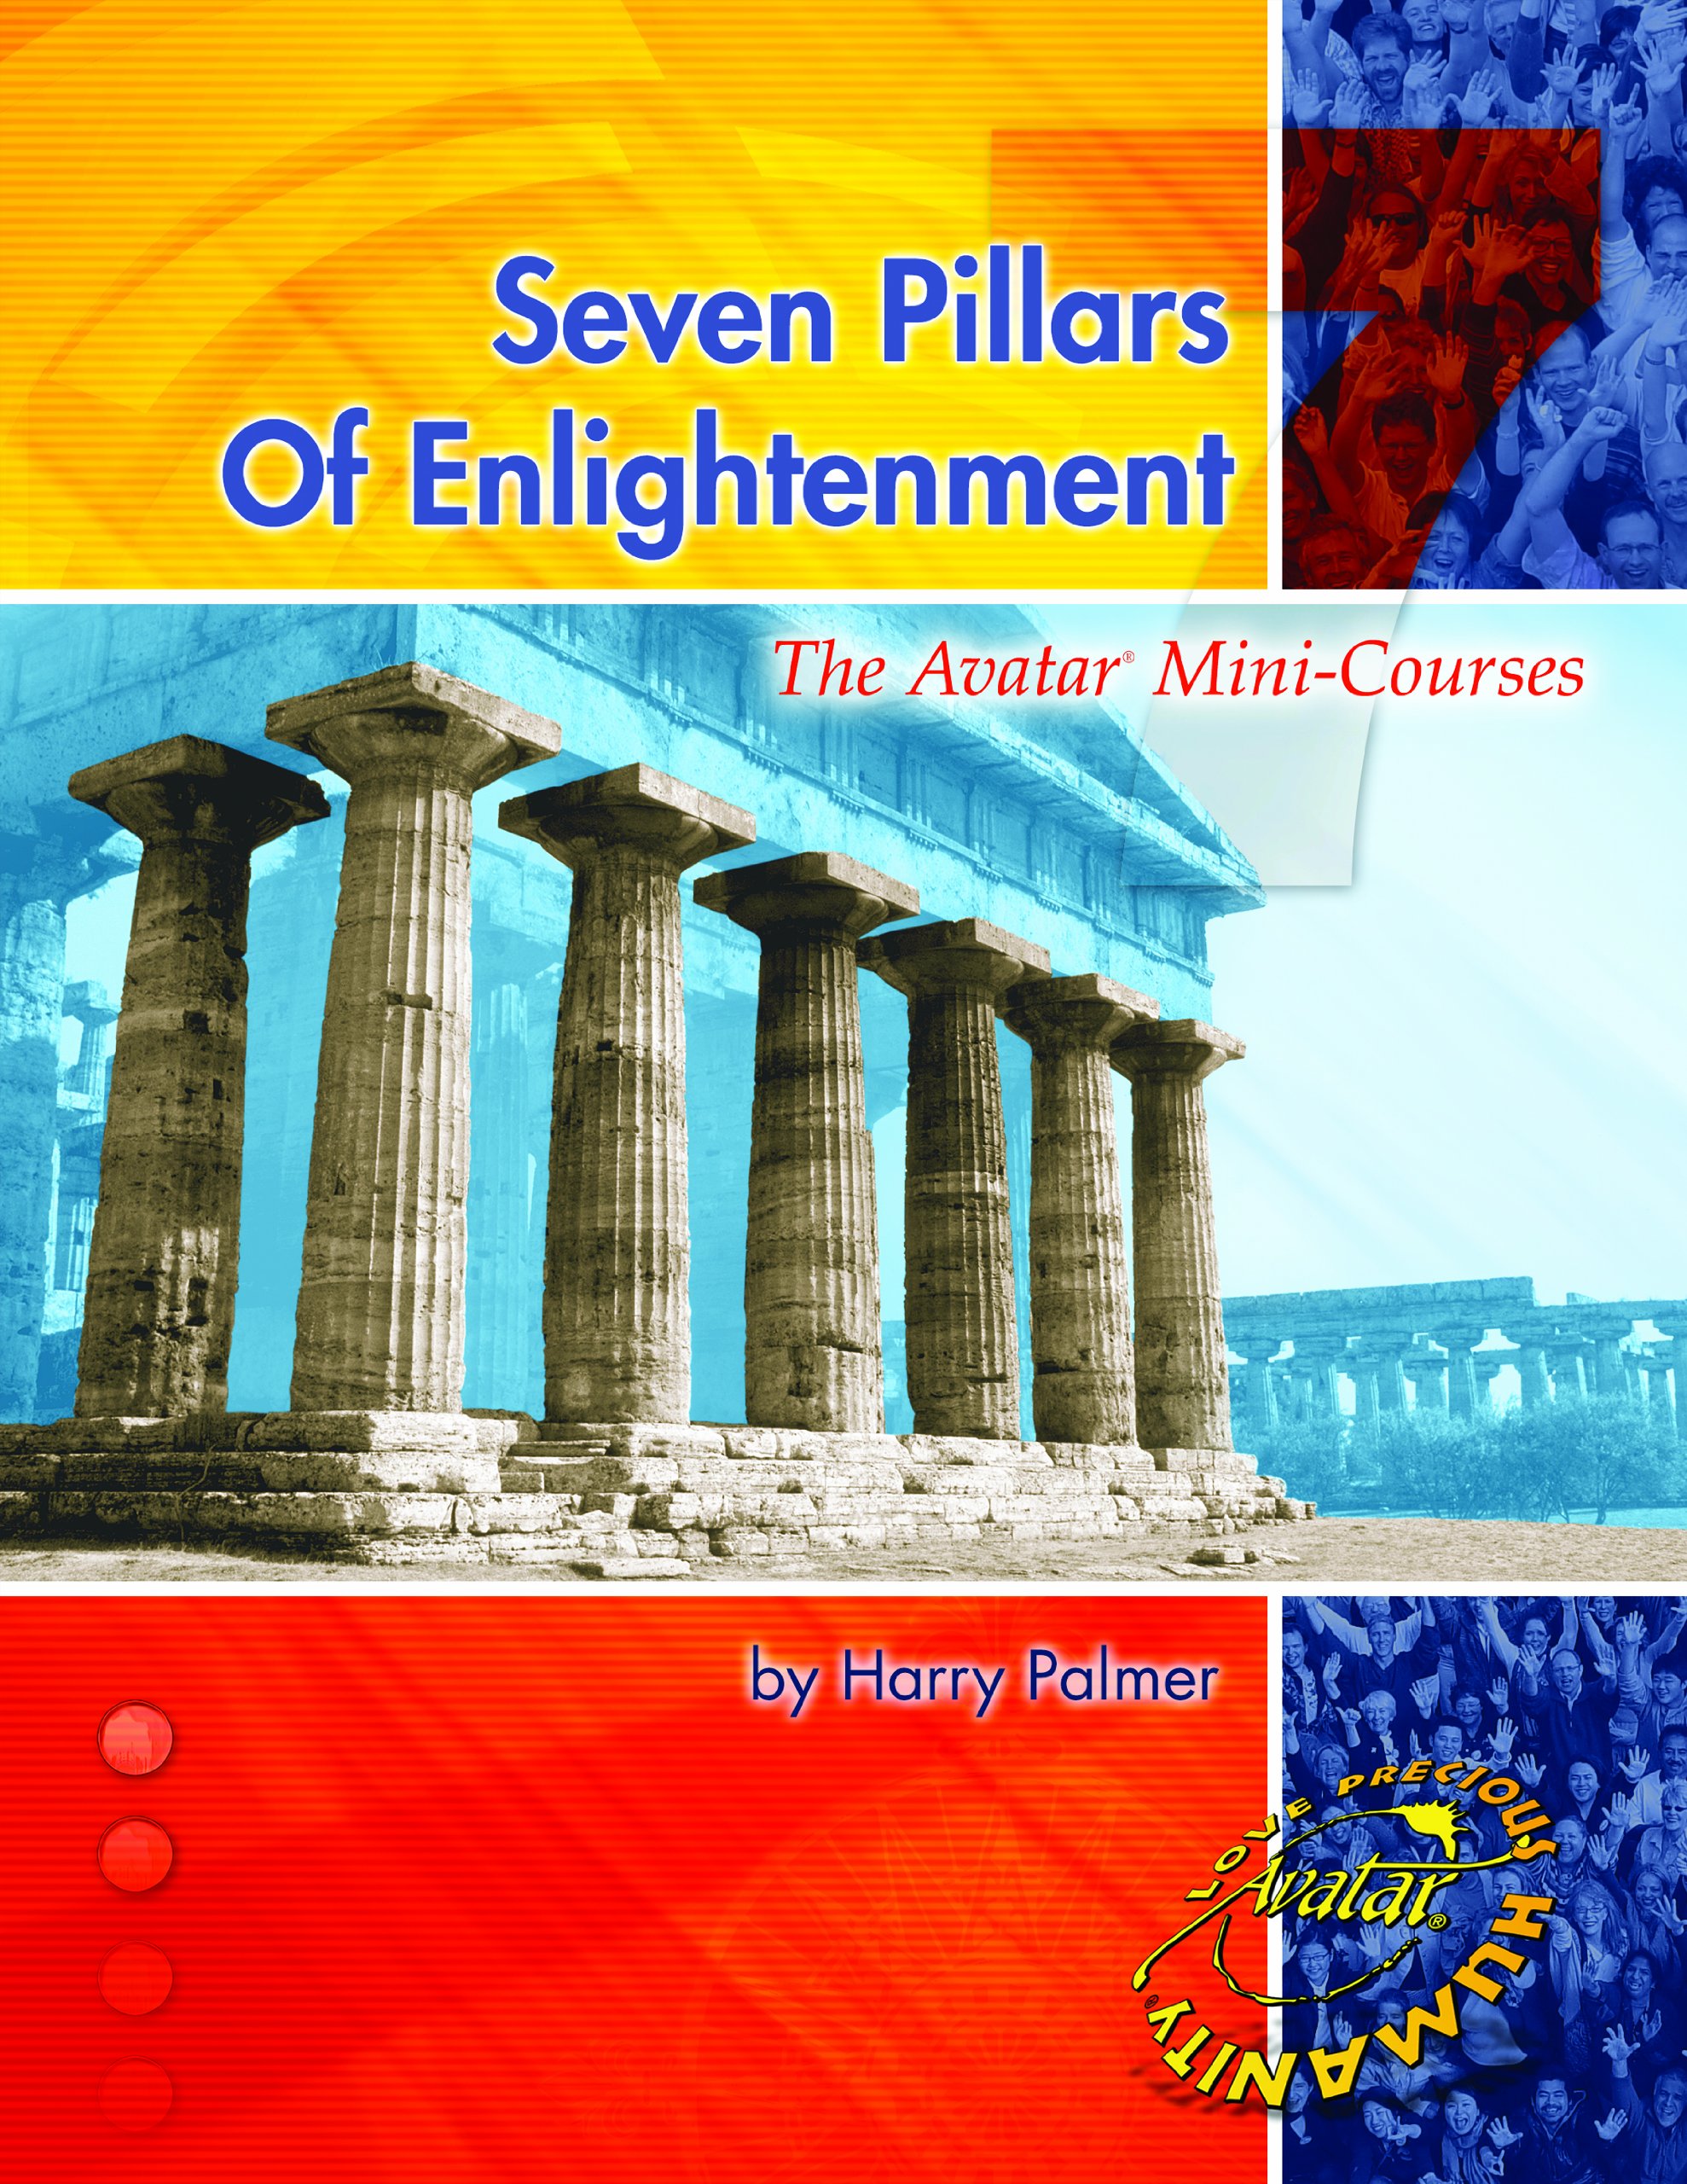 Join us to explore the principal facets of enlightenment